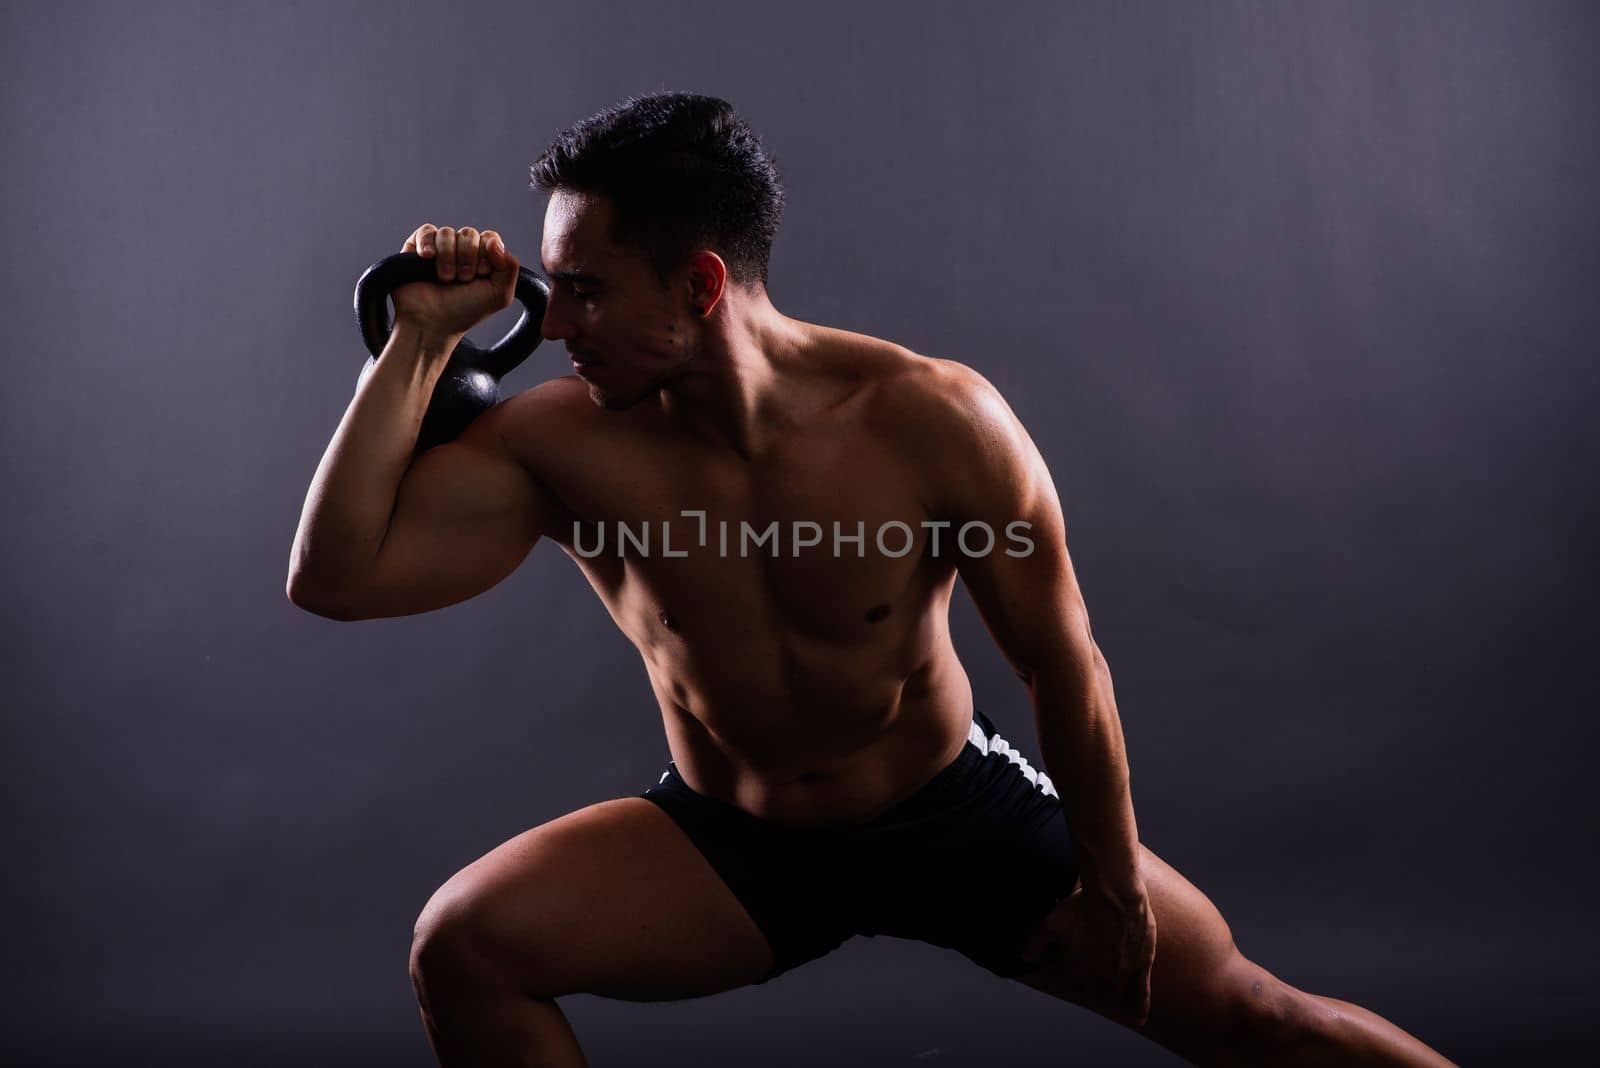 Handsome muscular man holding kettle bell with copy space. Hispanic male athlete by Zelenin